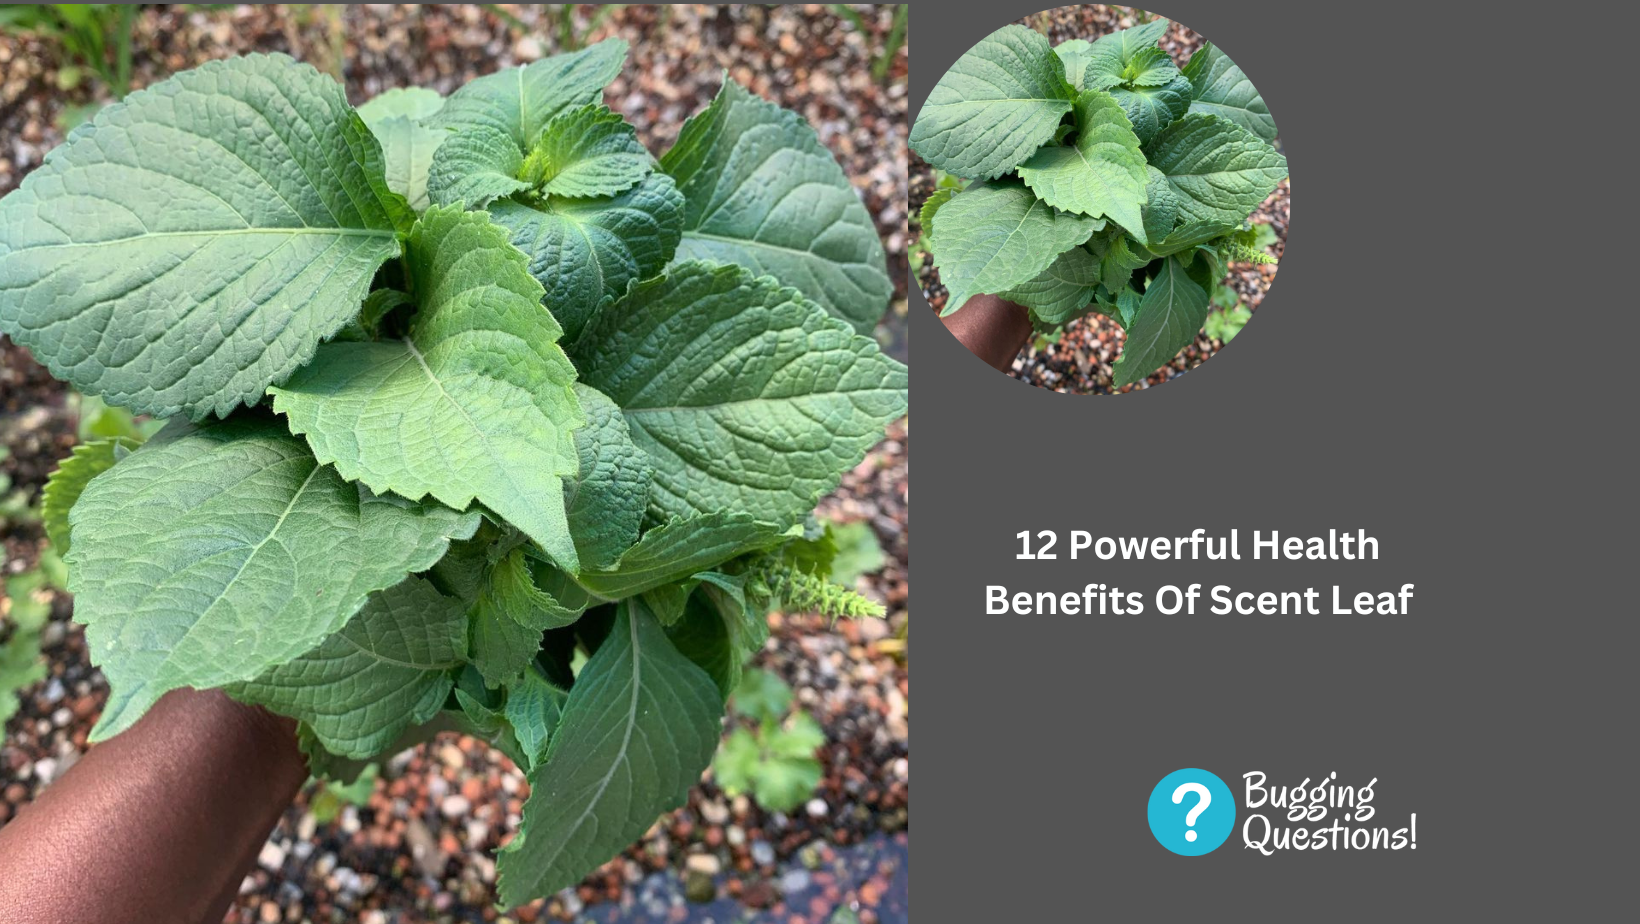 12 Powerful Health Benefits Of Scent Leaf